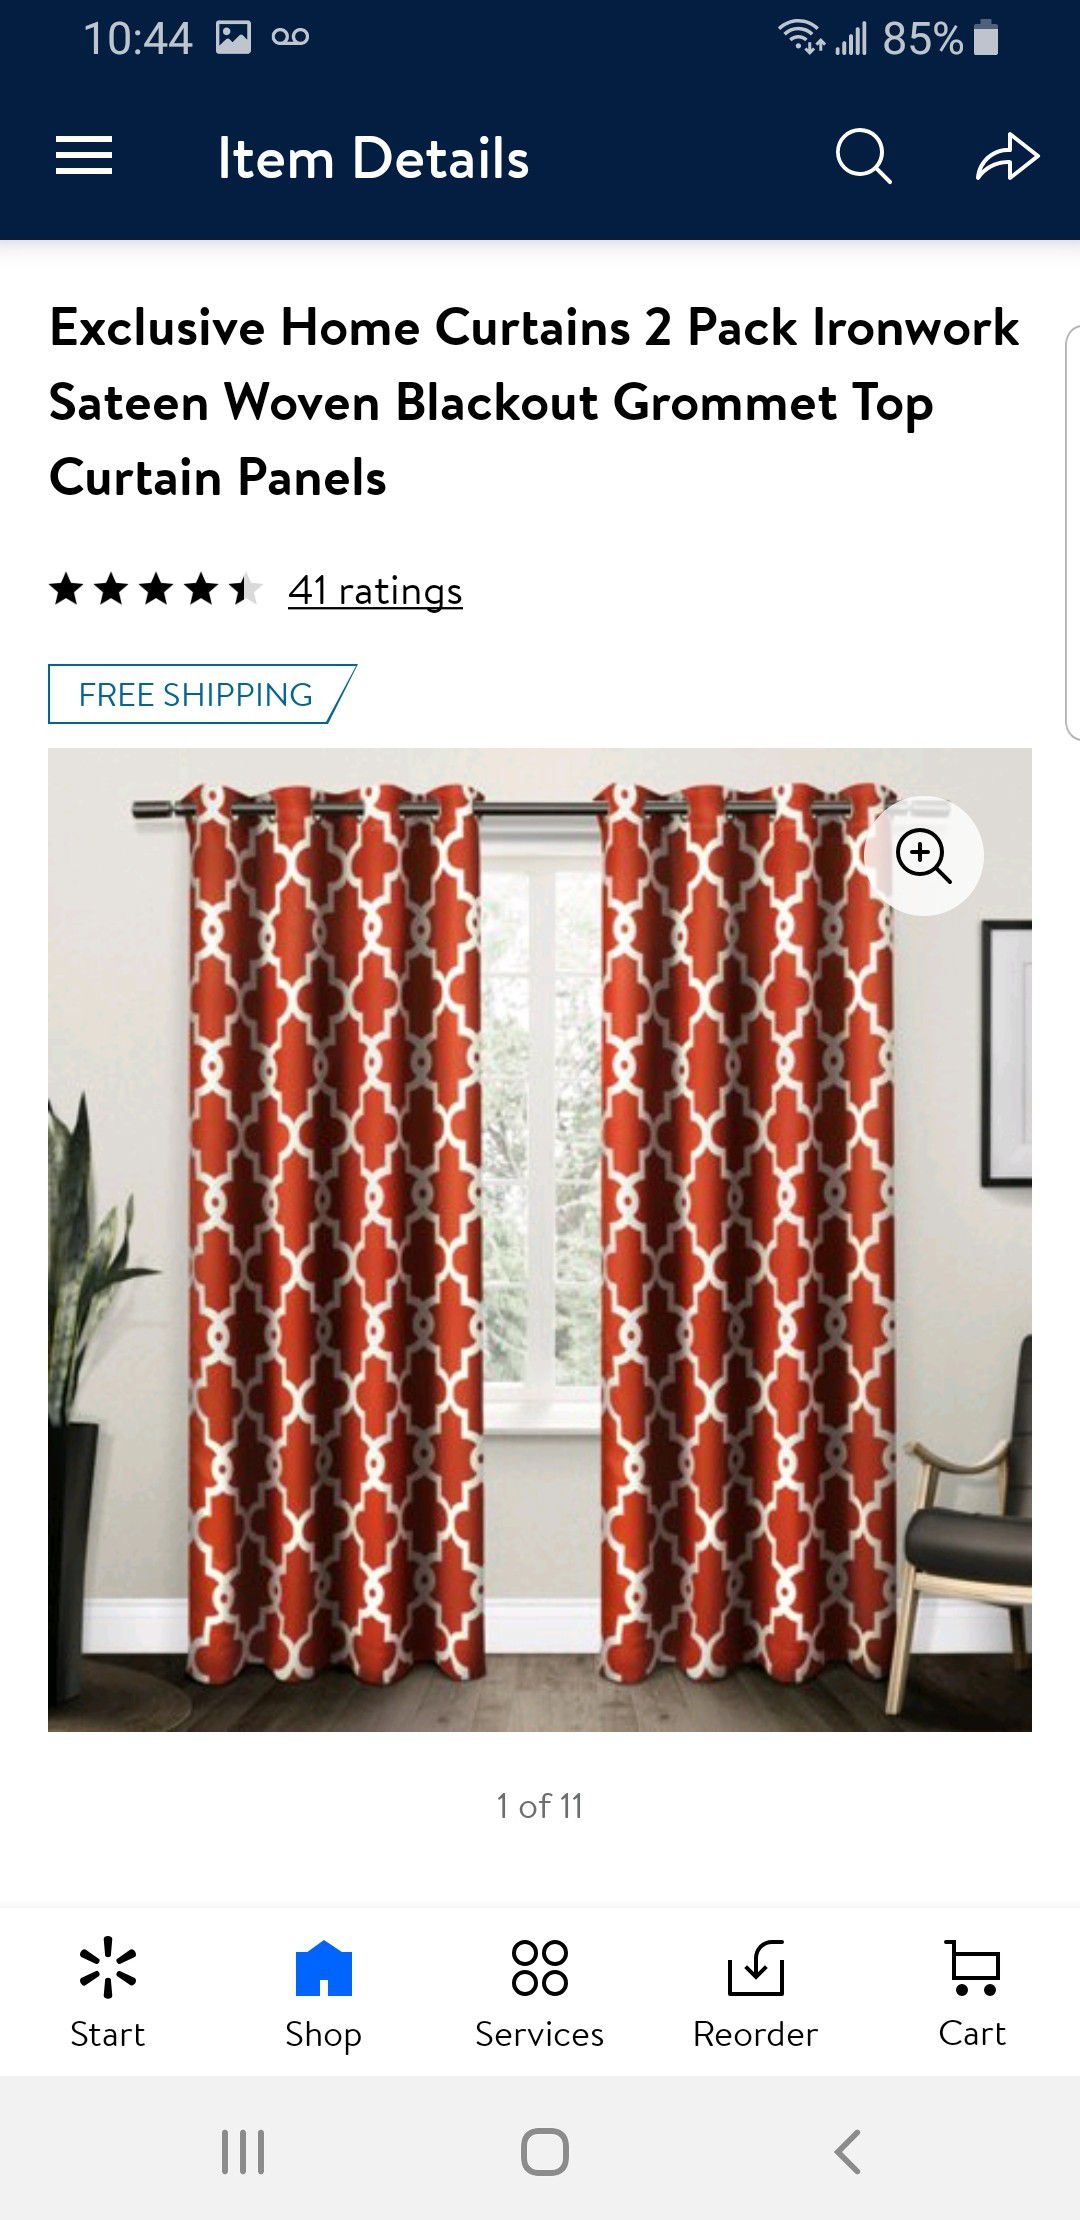 Exclusive home curtains 2 pack ironwork sateen woven blackout grommet top curtain panels